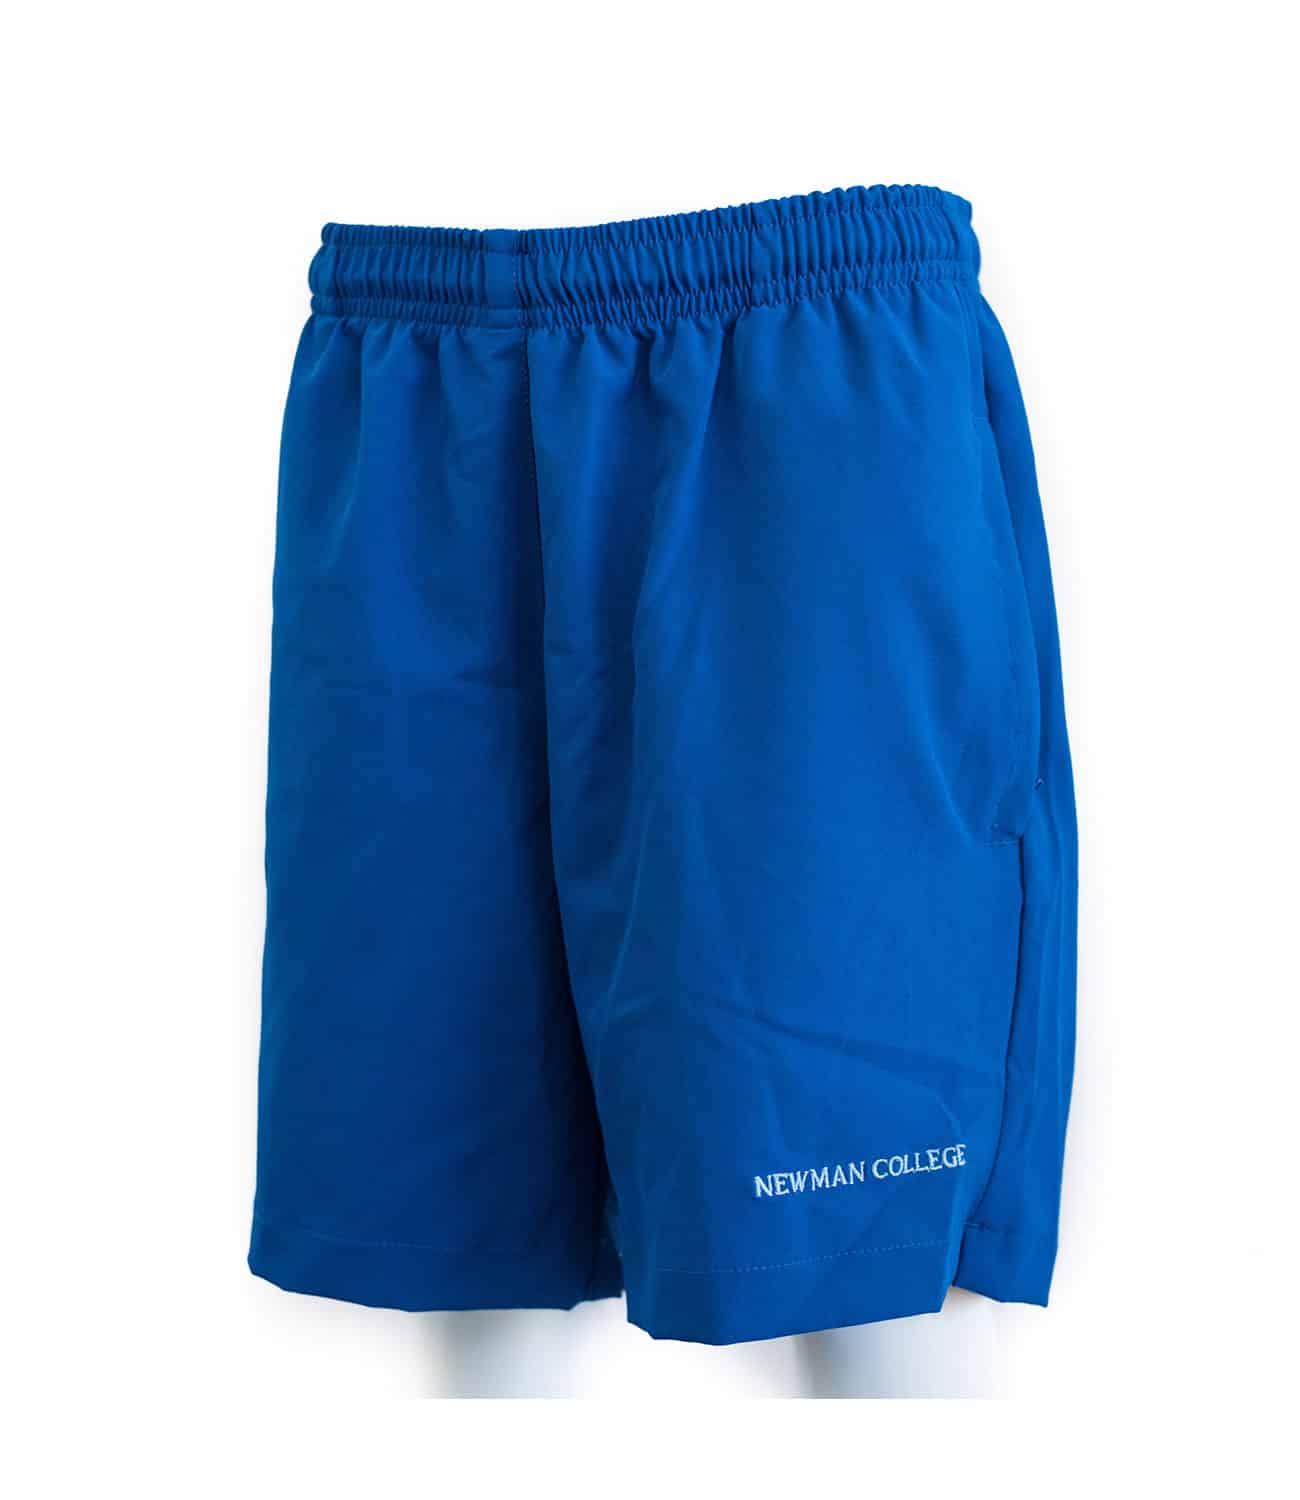 Sports Shorts - Newman College